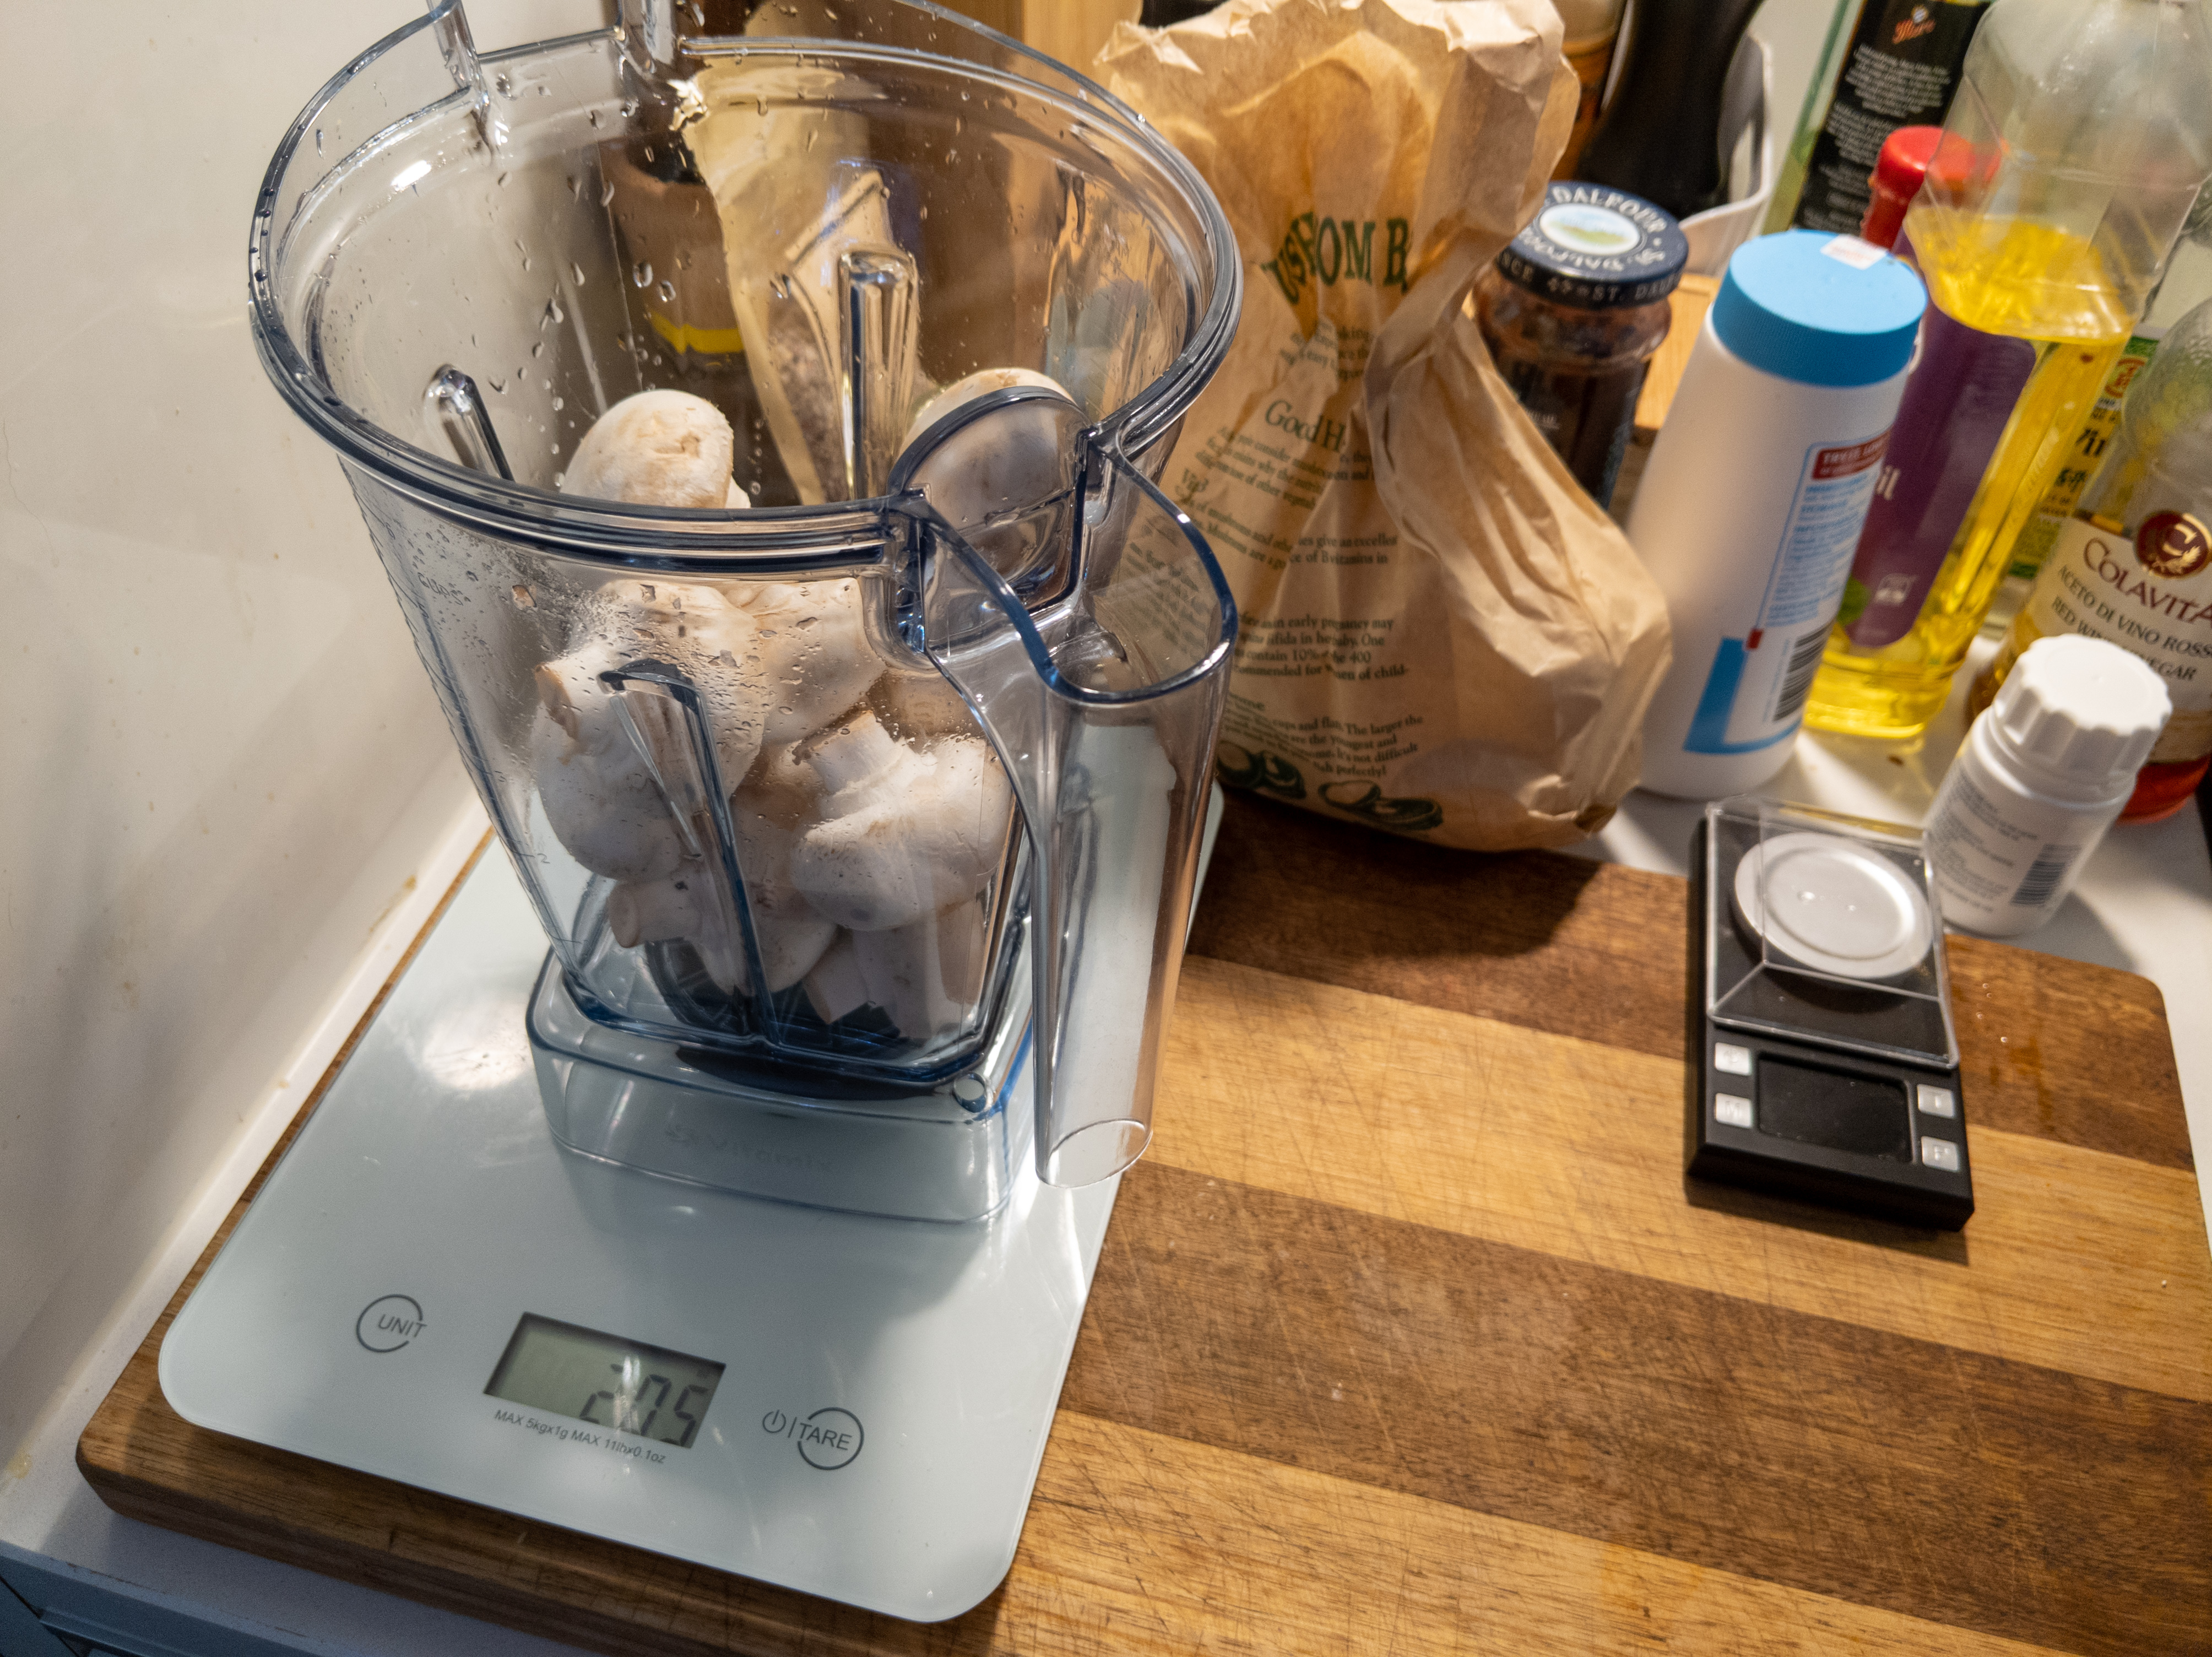 A blender canister on a scale, filled with mushrooms. The scale is sitting on a wooden cutting board on a cluttered kitchen counter.